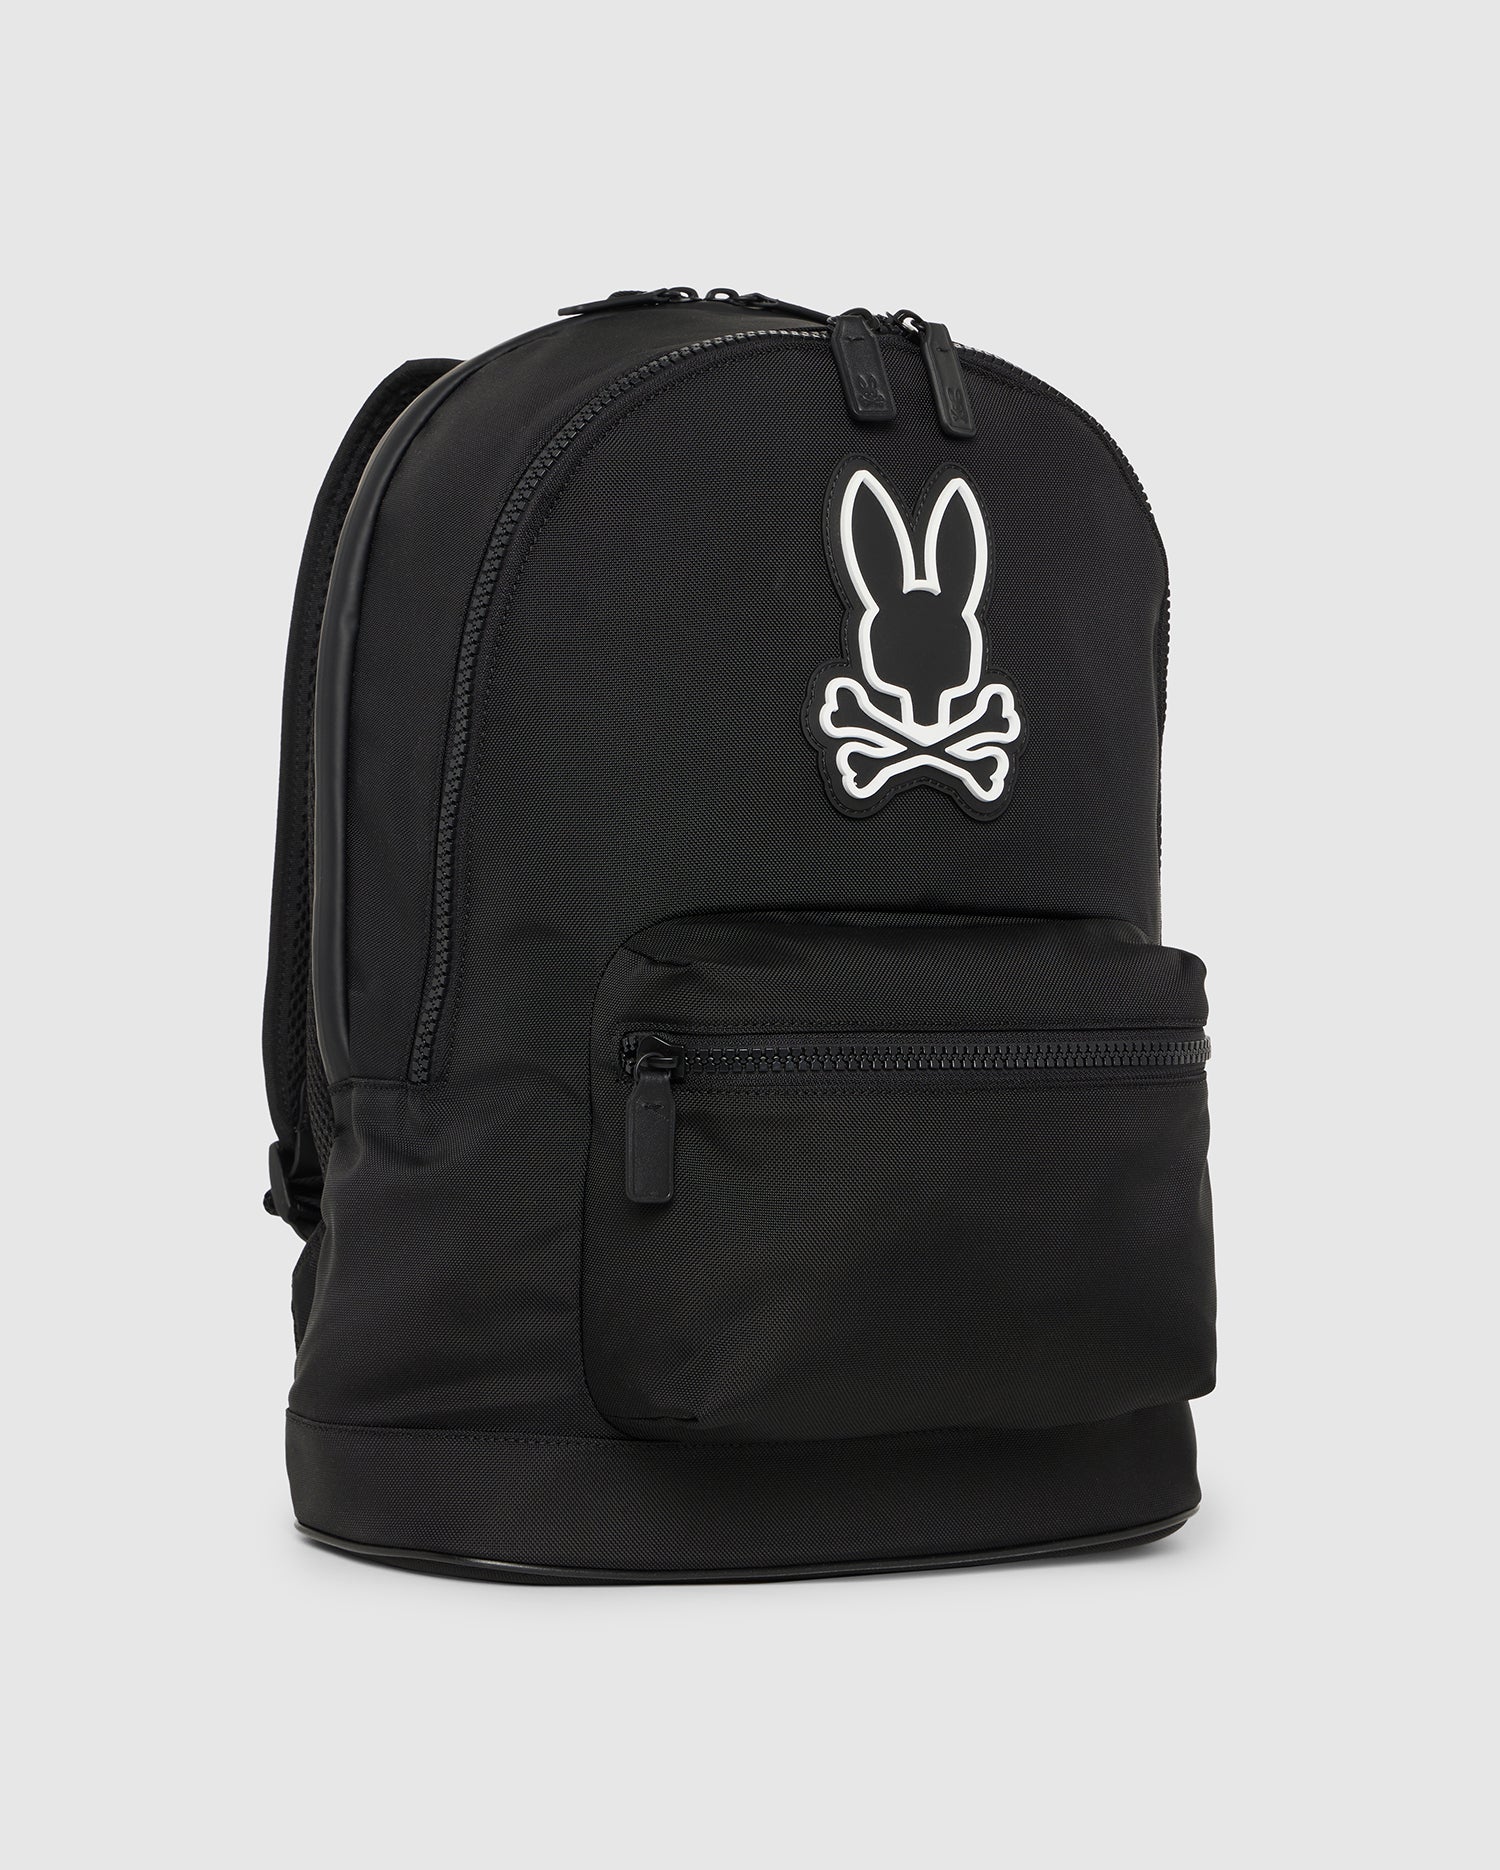 Black Psycho Bunny dome backpack featuring a distinct white bunny logo on the front, with a main compartment and a smaller front pocket, set against a plain white background.